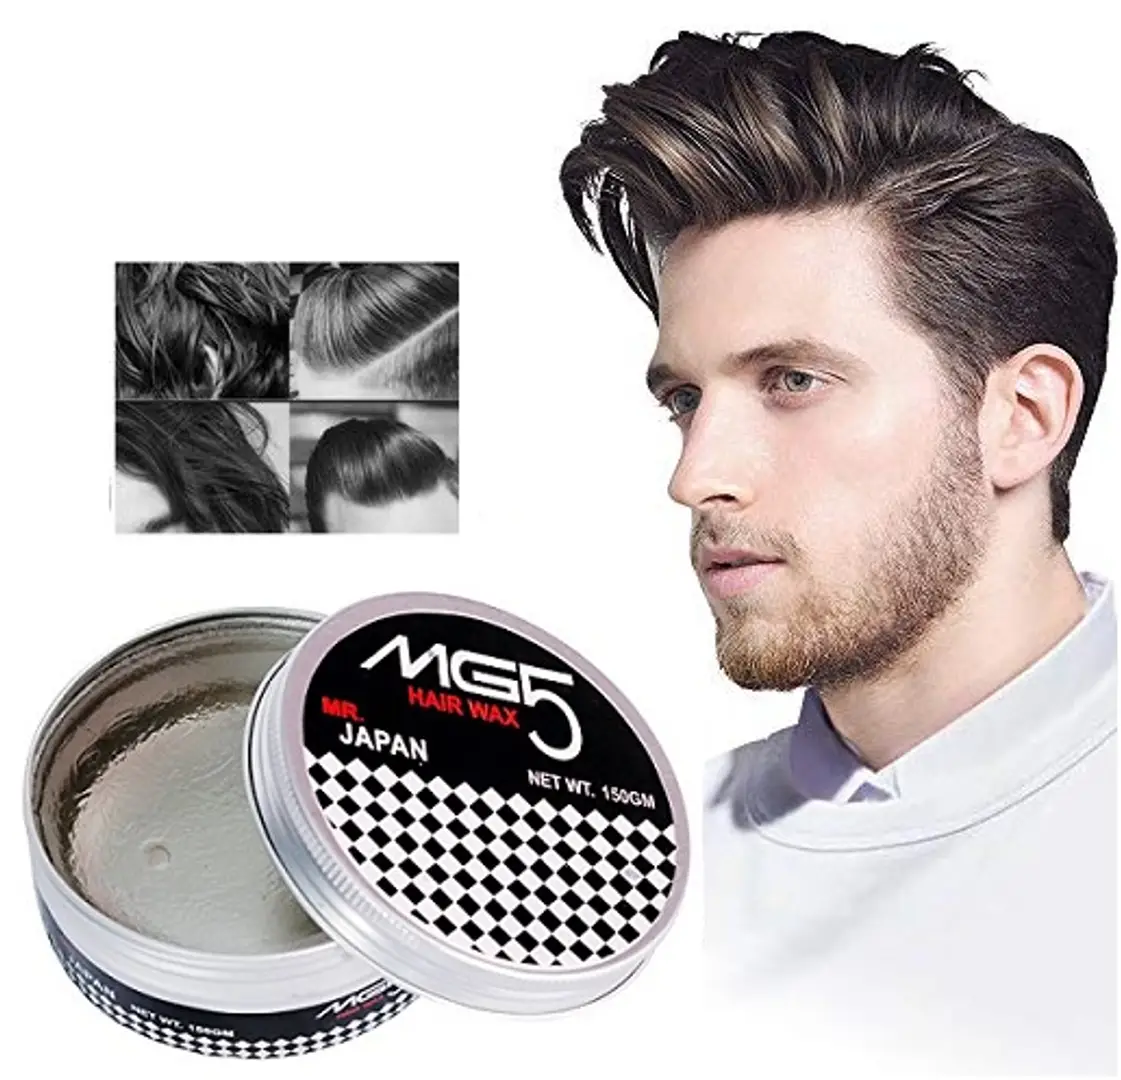 MG5 Hair Wax review  MG 5 wax is GOOD or NOT Side Effects  How To Use  Mg5 Hair Wax  YouTube